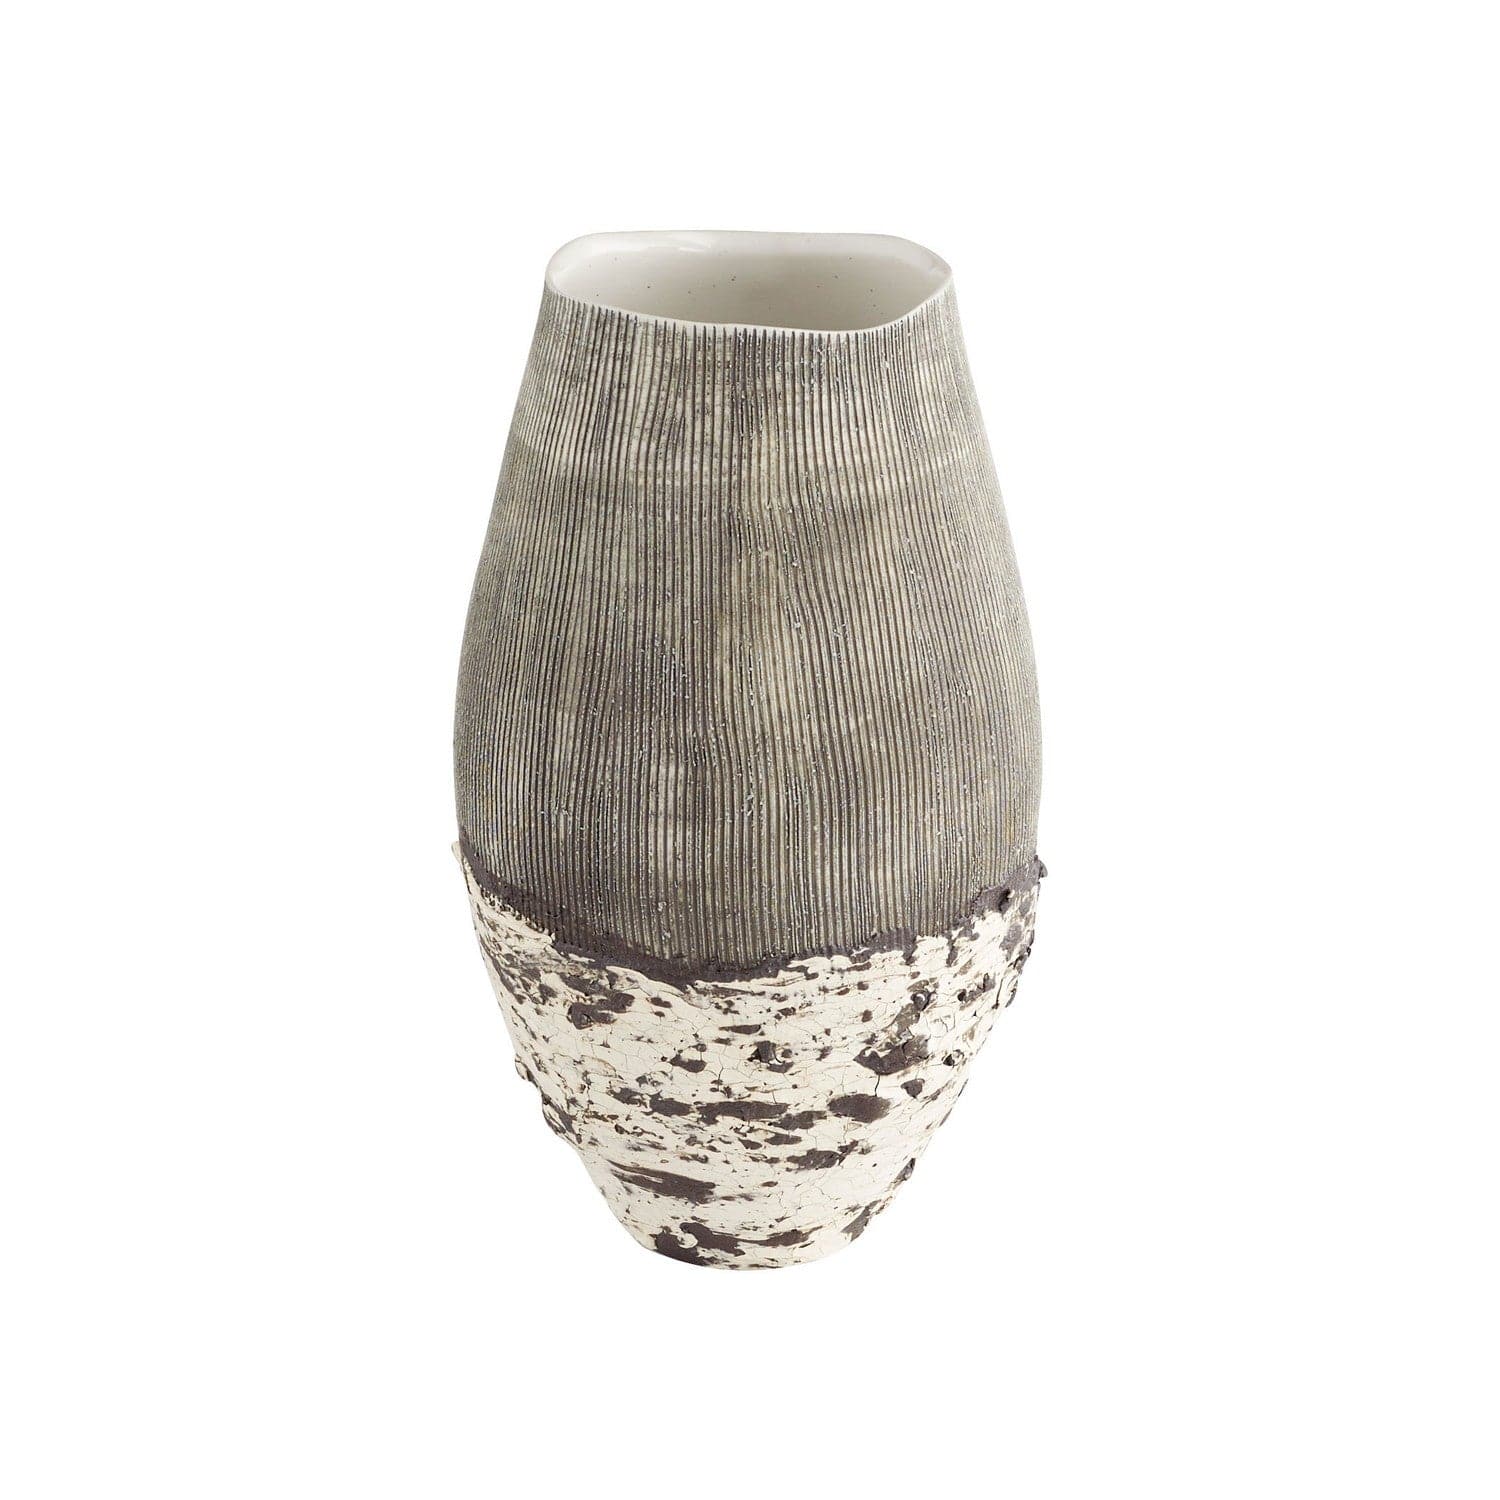 Cyan - 11411 - Vase - Calypso - Off White And Brown